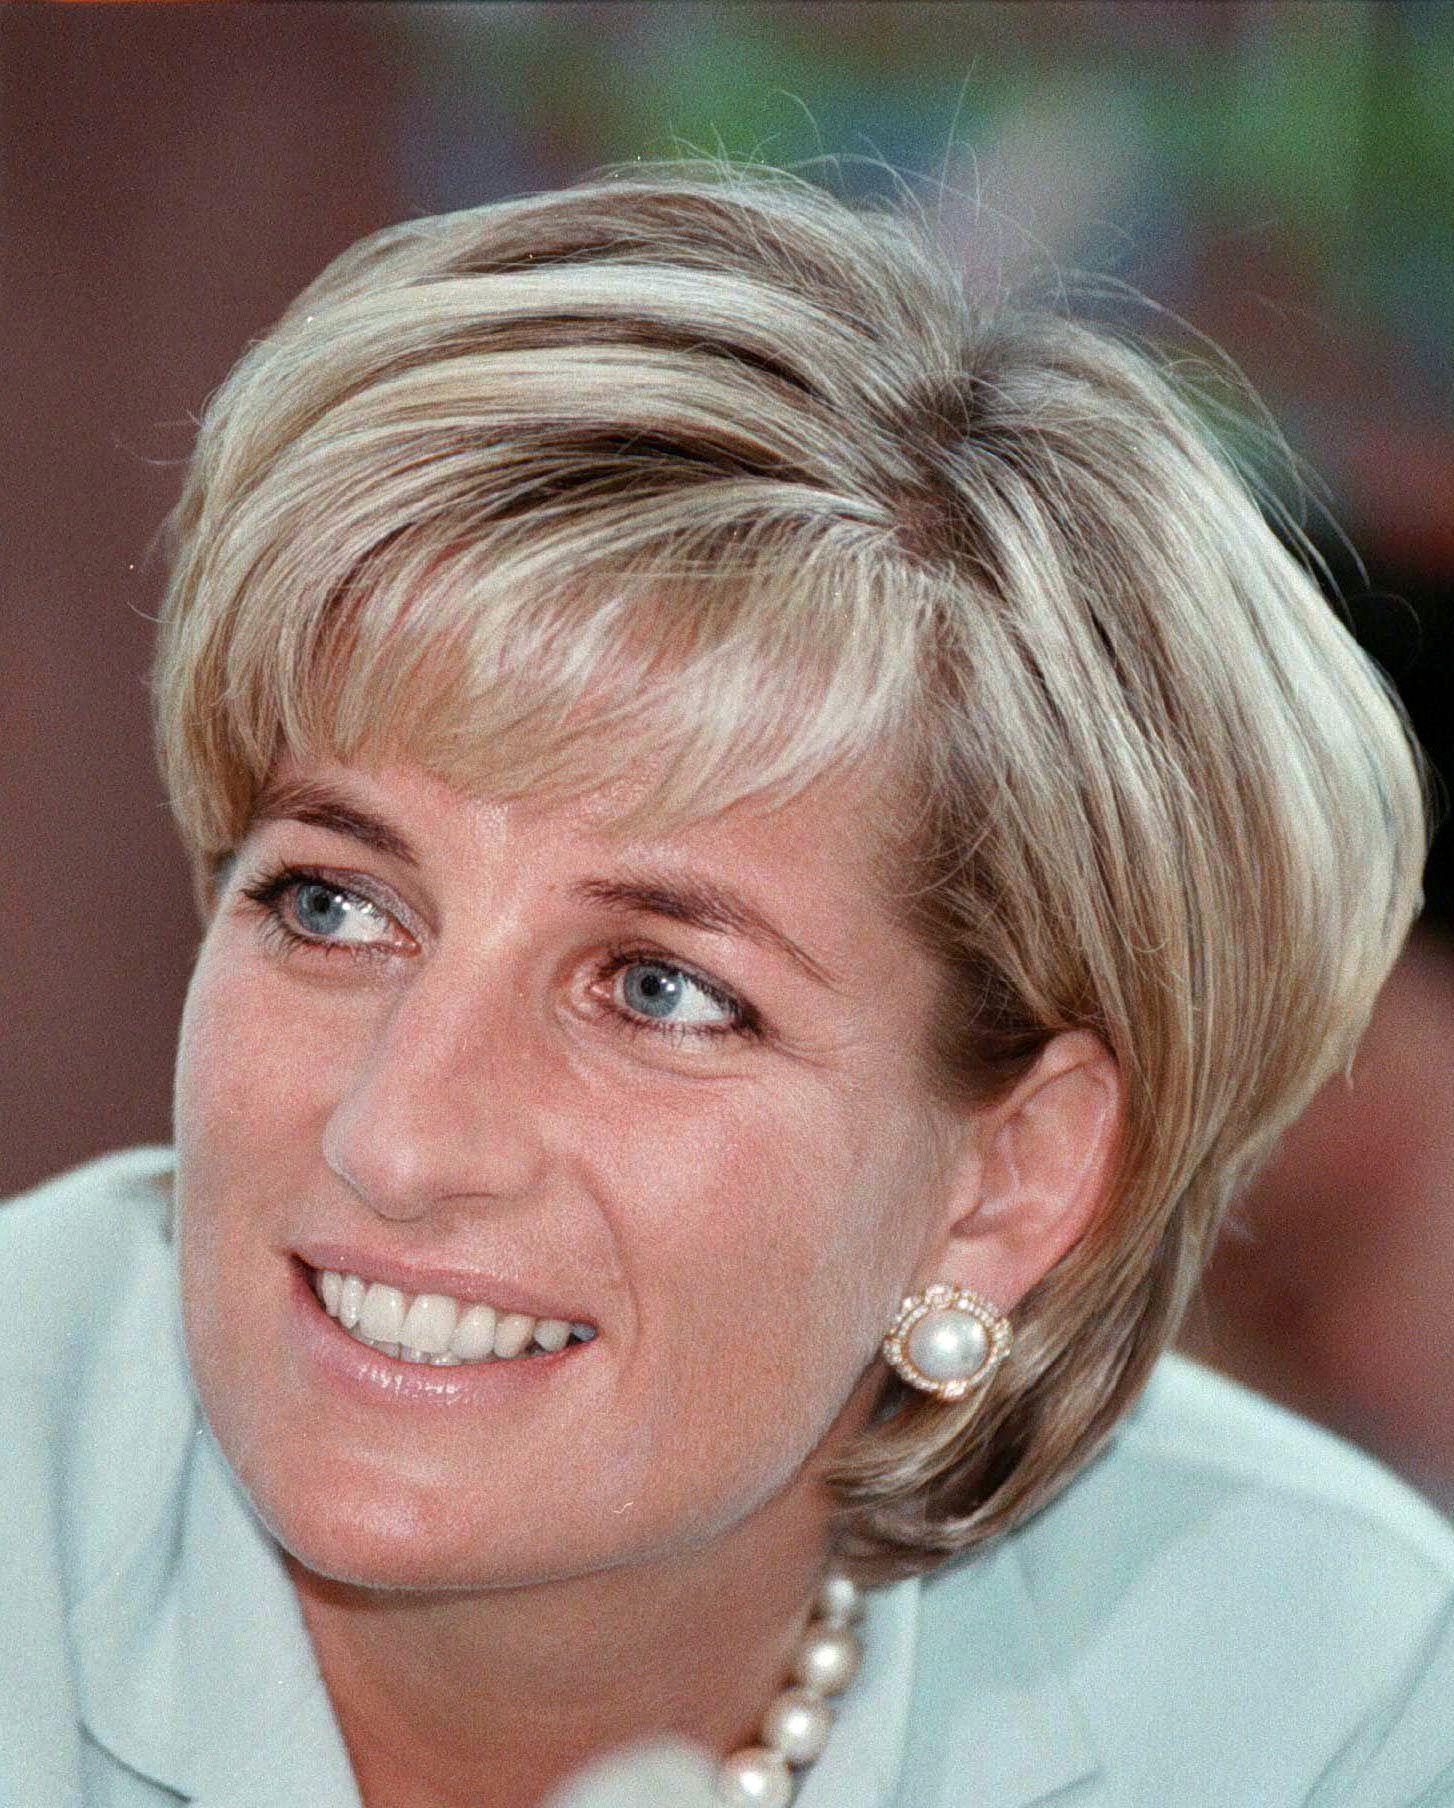 Royal Family Around the World: Images of the late People Princess Diana of  Wales Enchanting Life - Marking the 20th Anniversary of her death - August  13, 2017